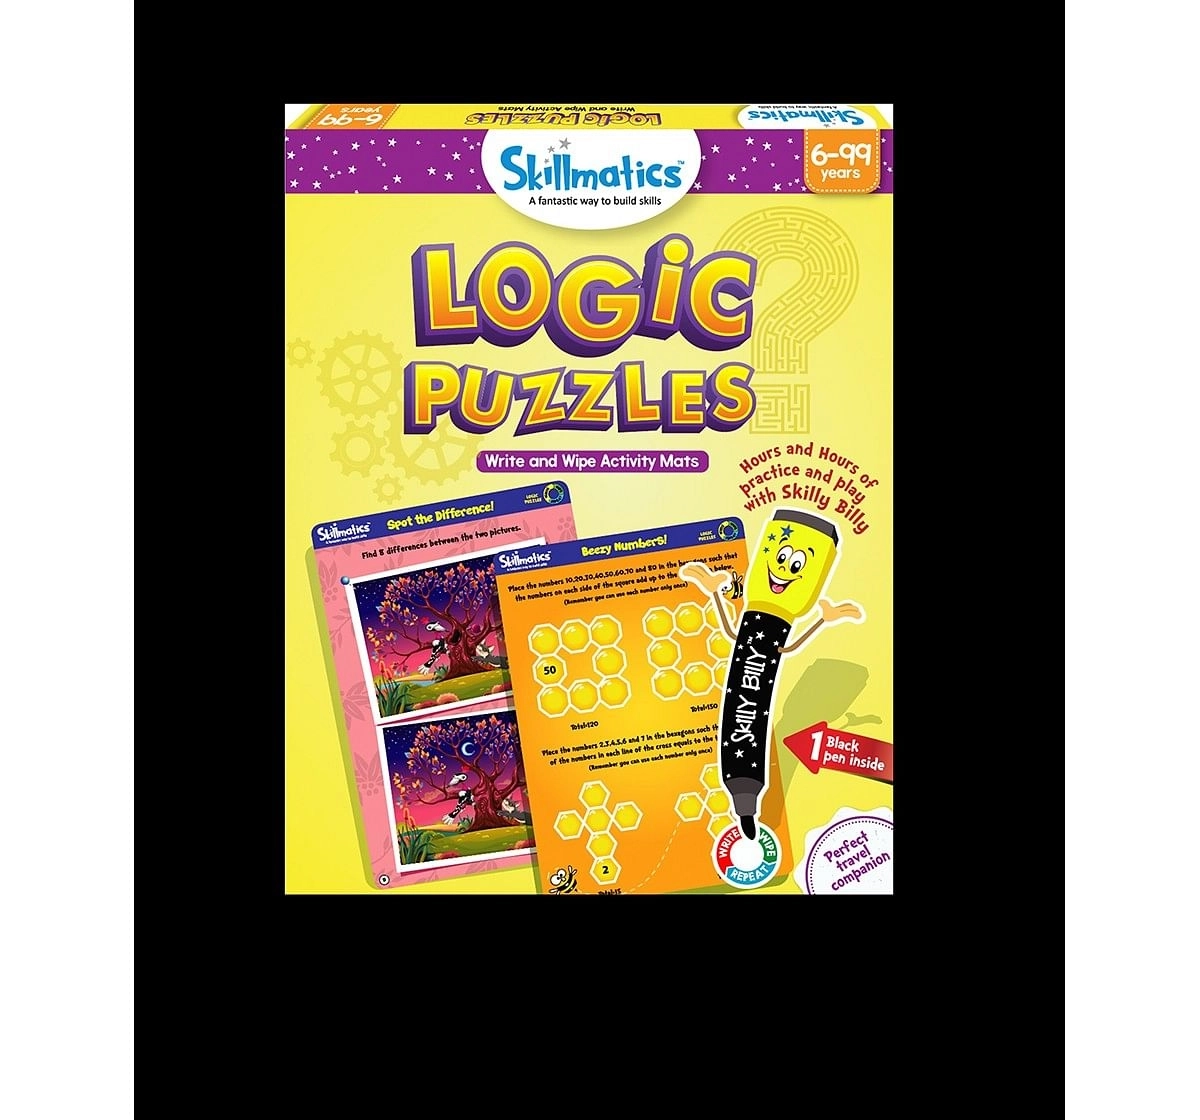  Skillmatics Logic Puzzles Games for Kids age 6Y+ 